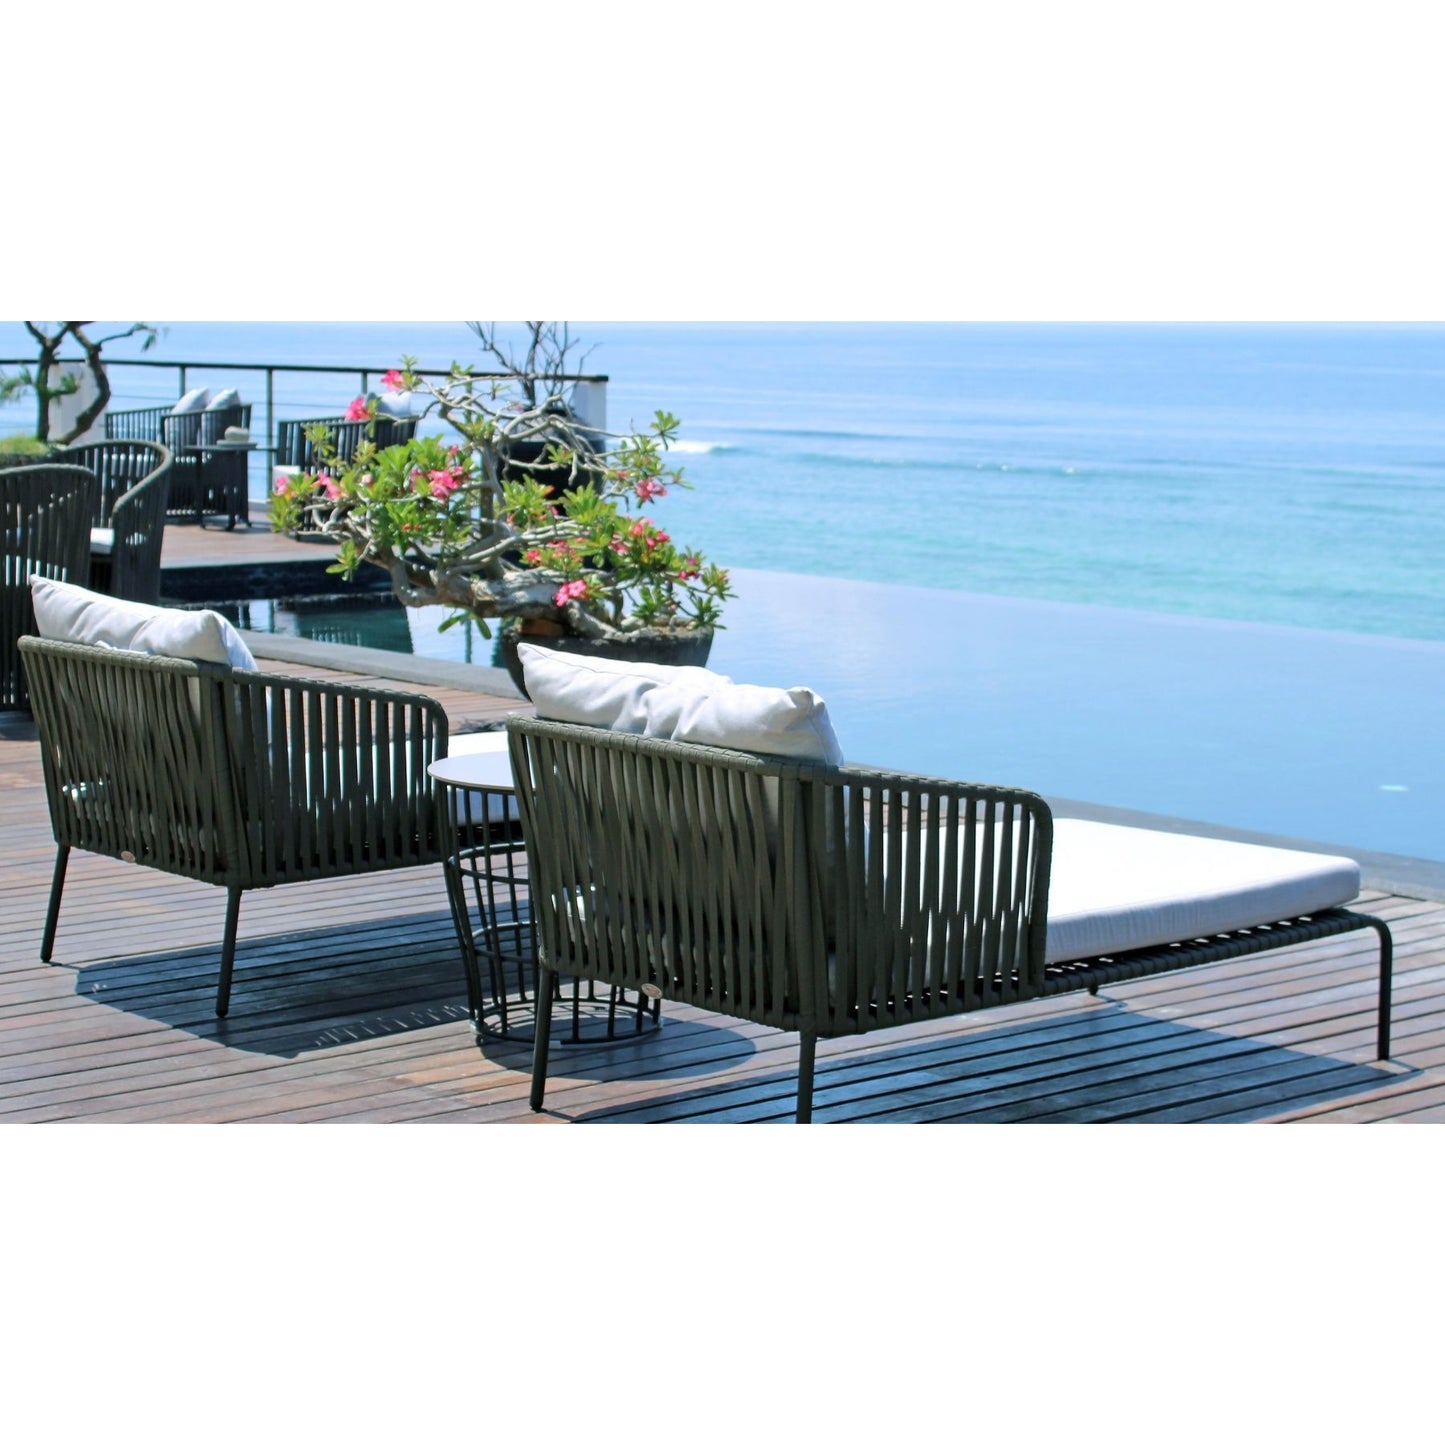 Milano Chaise - PadioLiving - Milano Chaise - Outdoor Lounger - PadioLiving